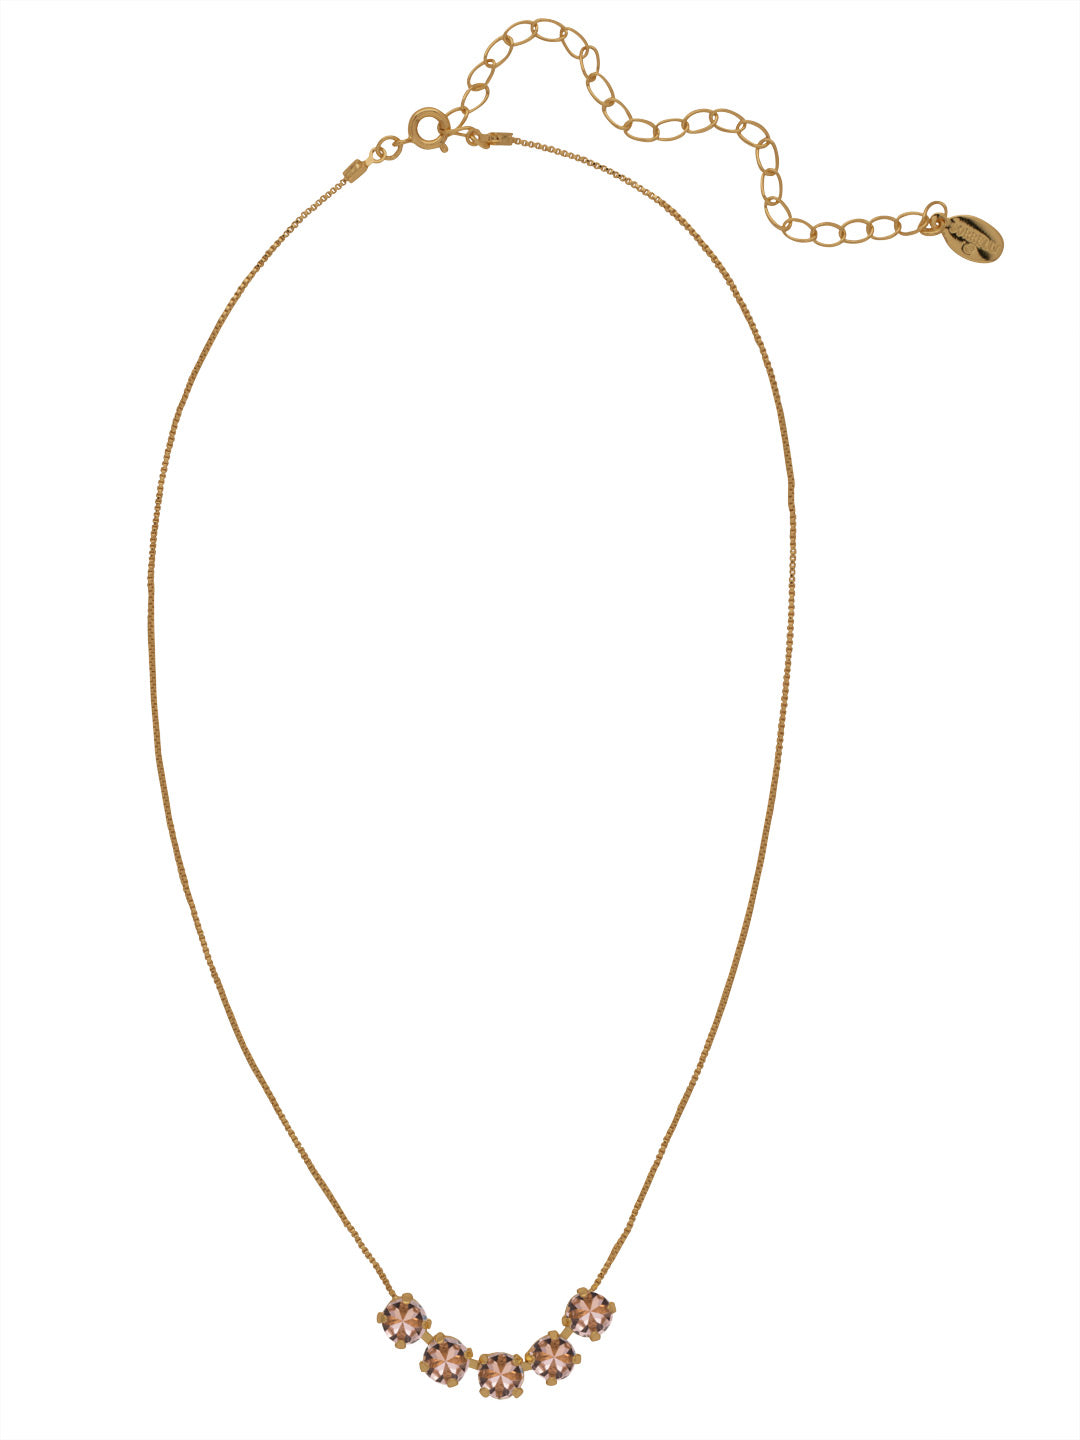 Shaughna Tennis Necklace - NFC84AGVIN - <p>The Shaughna Tennis Necklace features five crystals on a delicate adjustable chain. From Sorrelli's Vintage Rose collection in our Antique Gold-tone finish.</p>